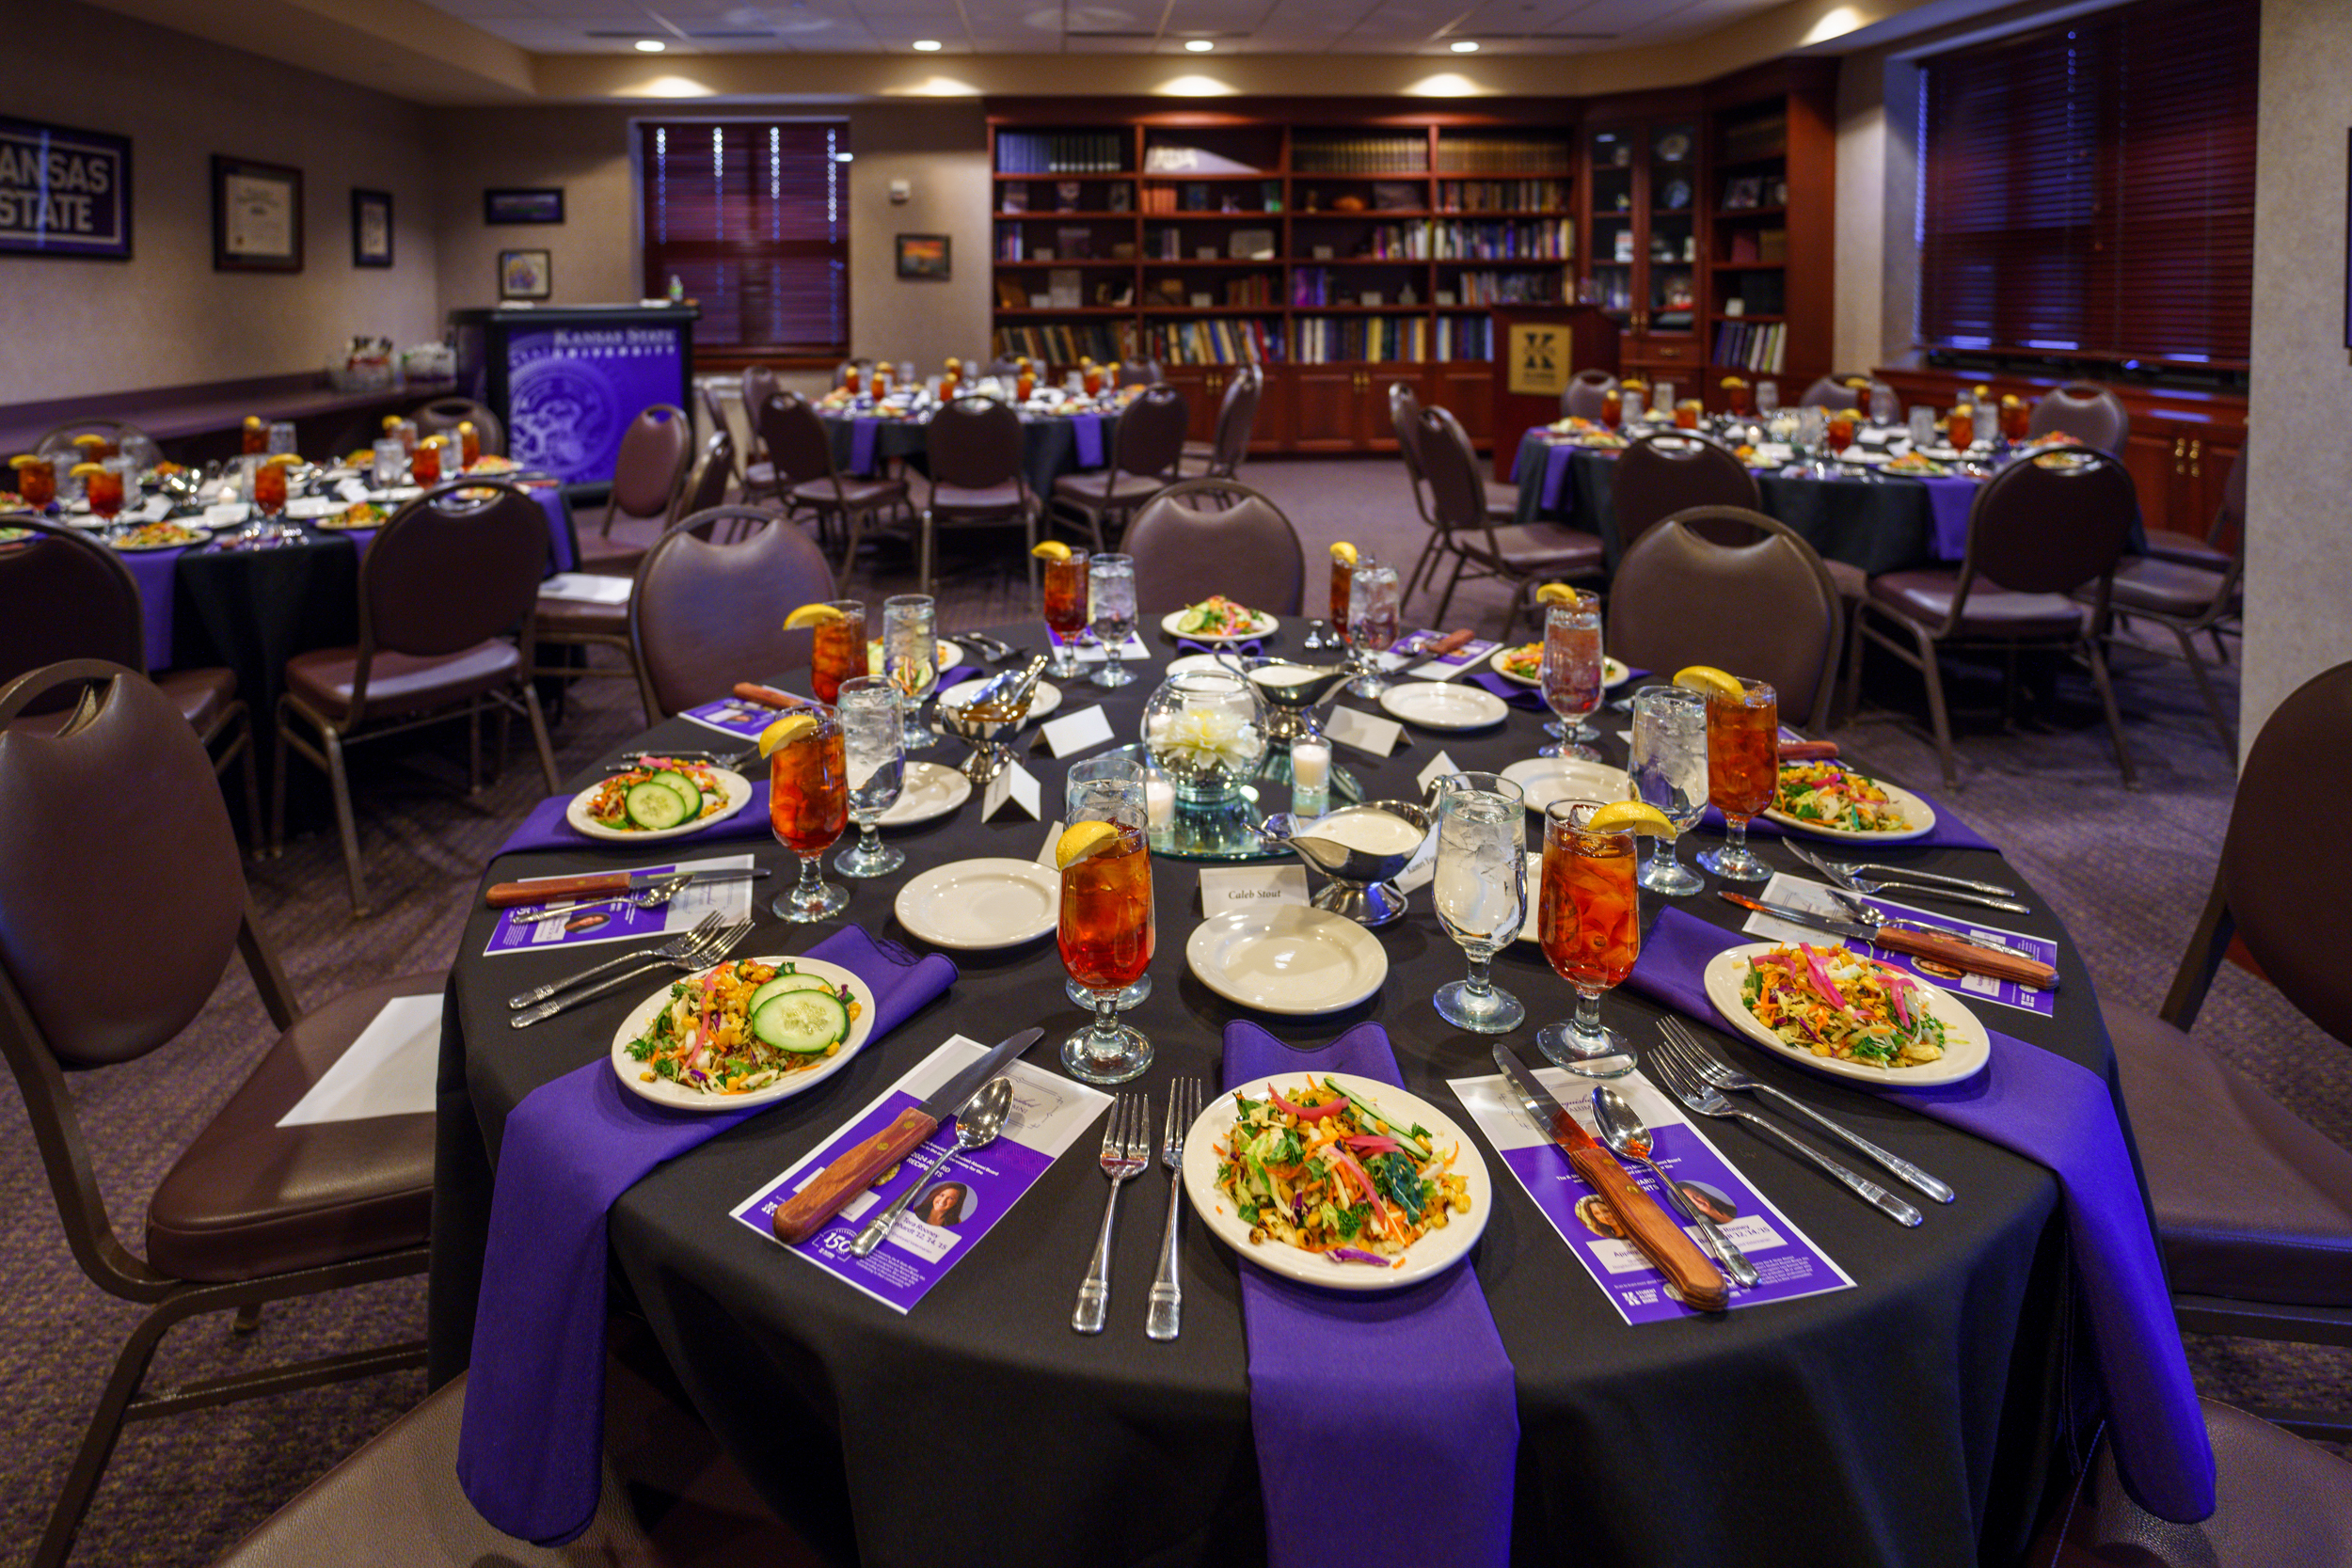 Hagans Library with tables set up for a dinner